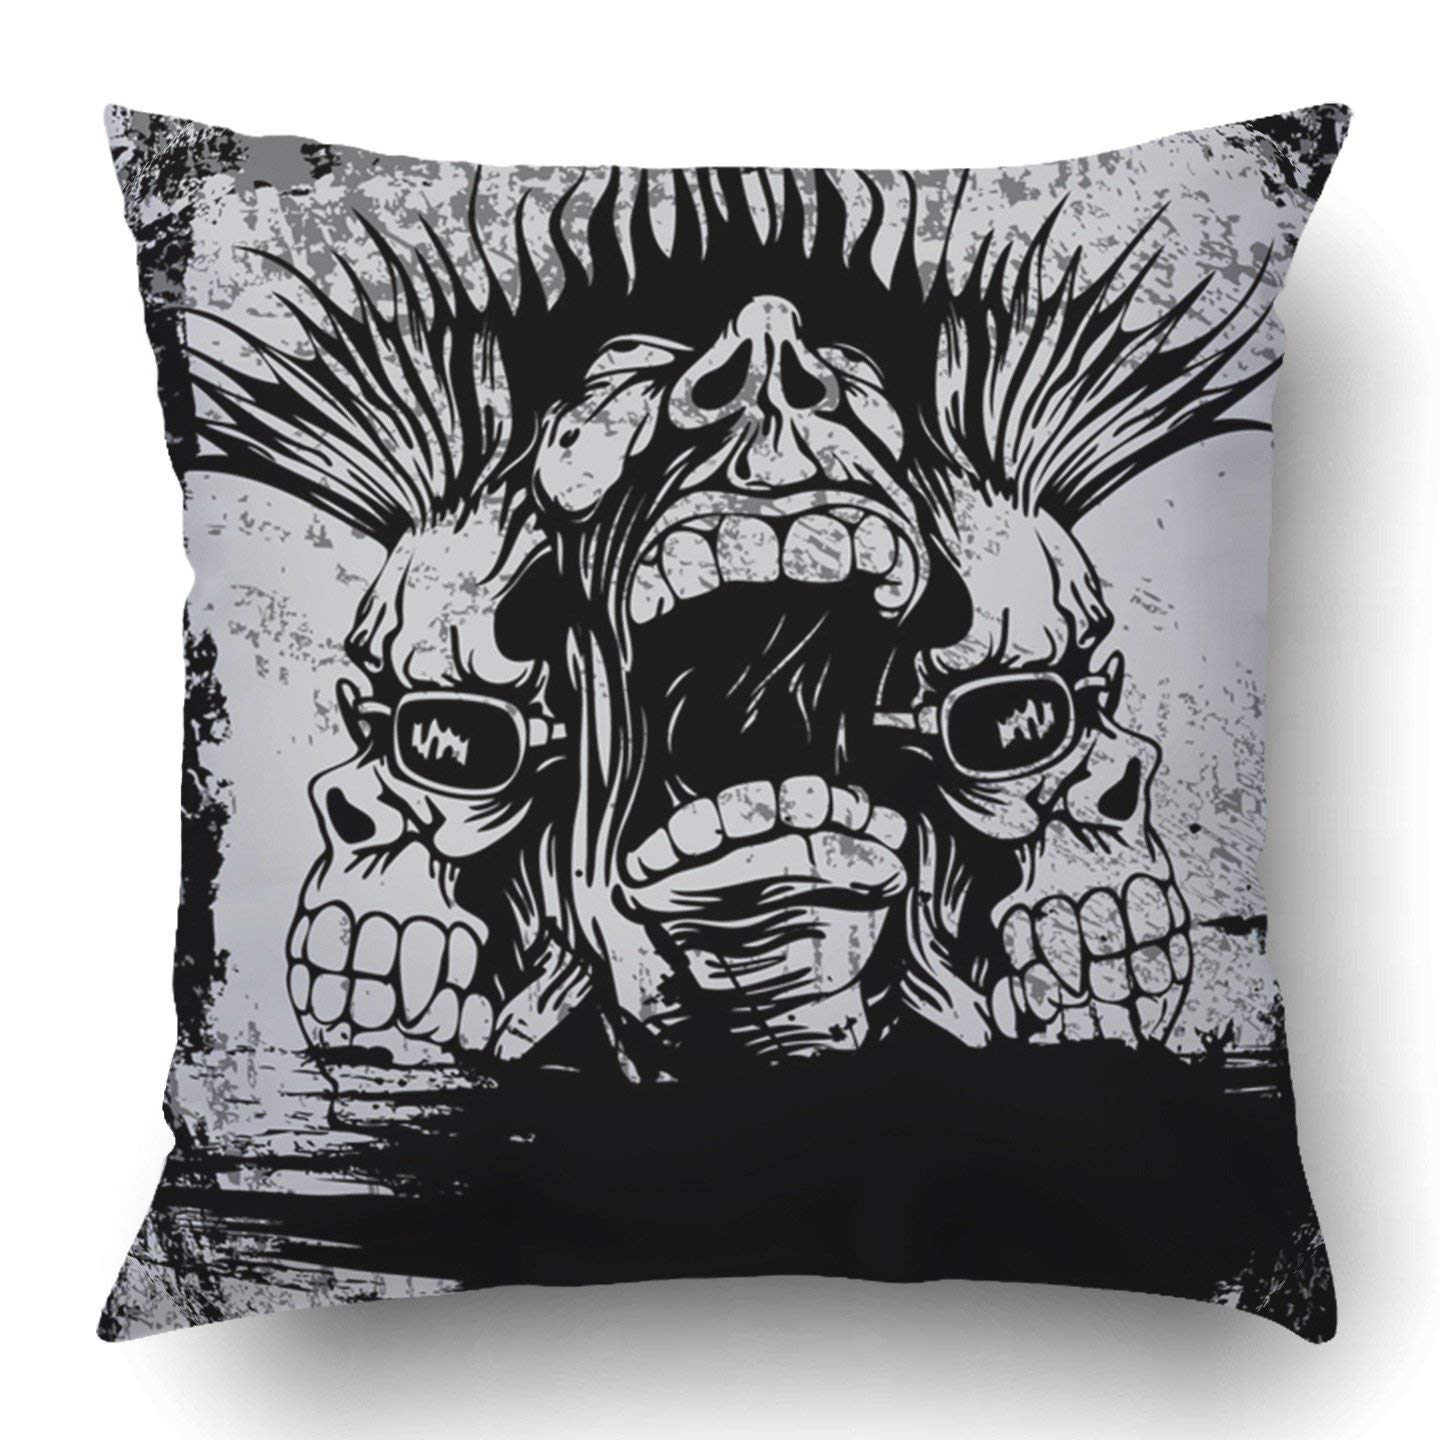 WOPOP Black Rock with Punk Musician for Cd Design Tattoo Gothic Horror Music Party Revolt Hard Pillowcase 18x18 inch - image 1 of 1